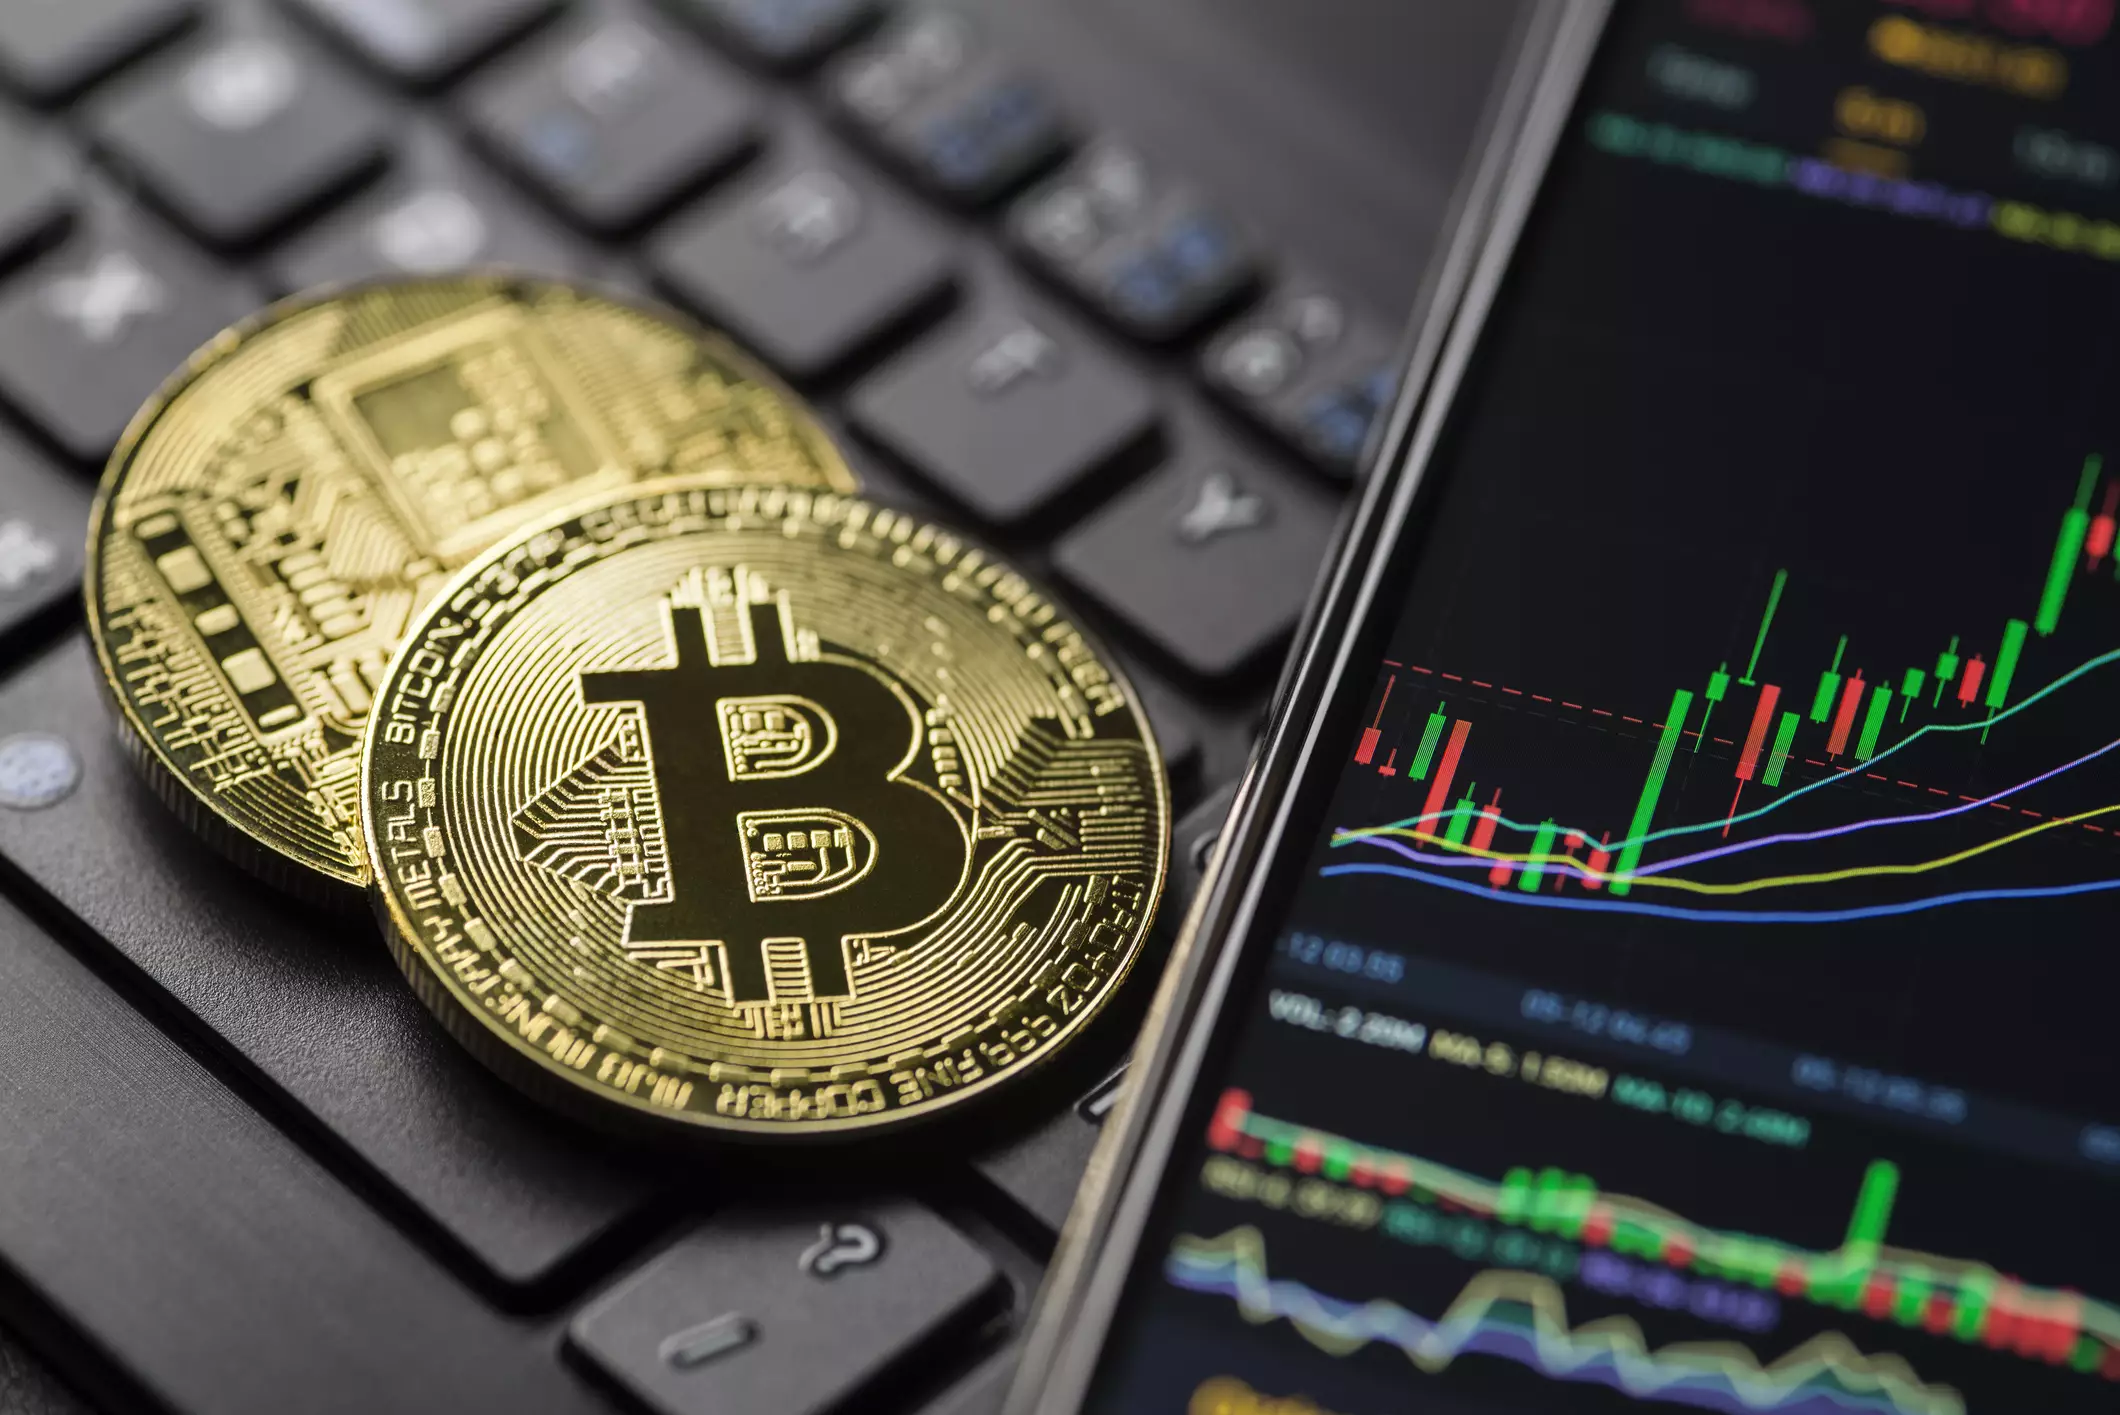 Bitcoin Analyst Predicts Potential Surge to $45,000, but a Correction is Expected